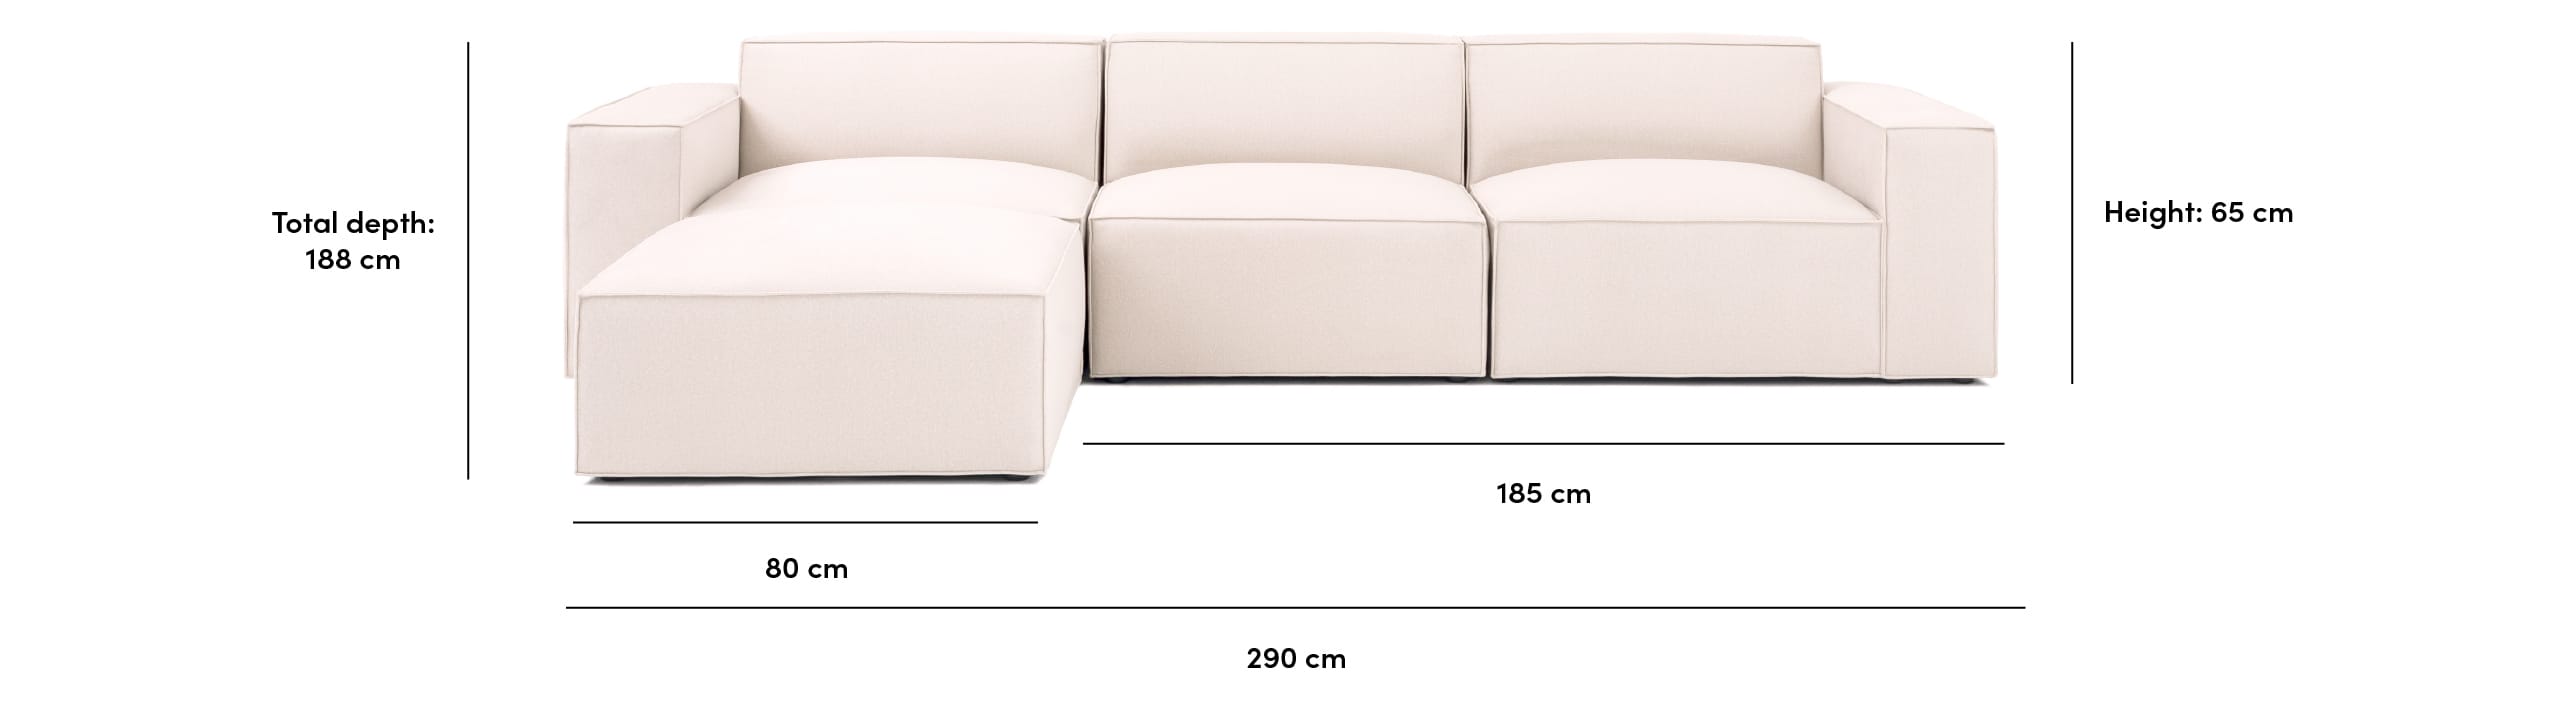 Noa Pacific sectional sofa dimensions